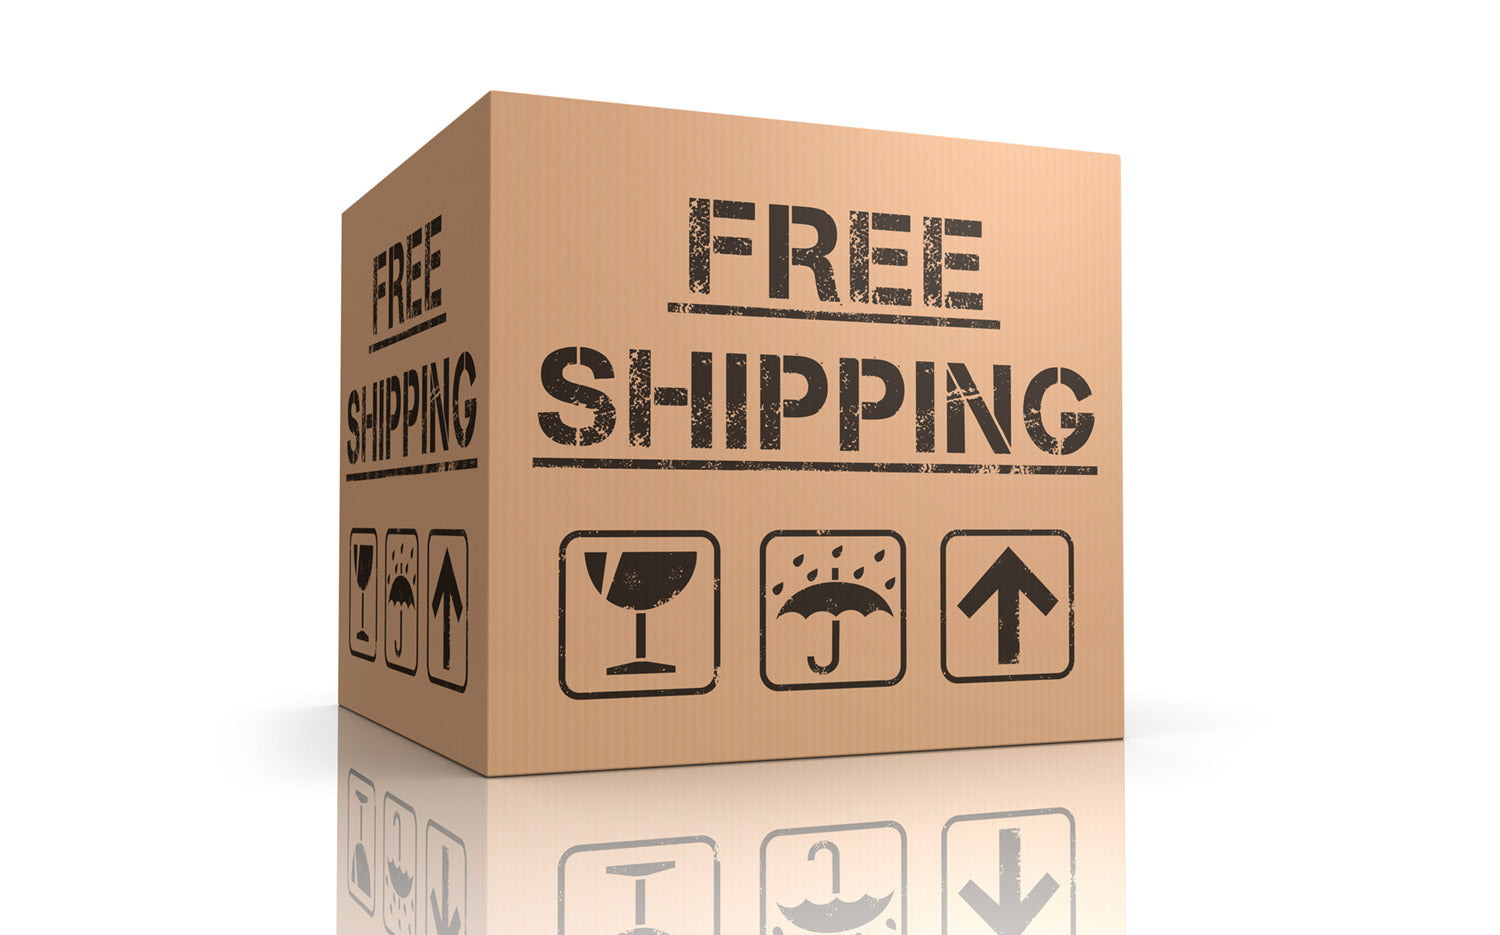 Free shipping with any order over £100